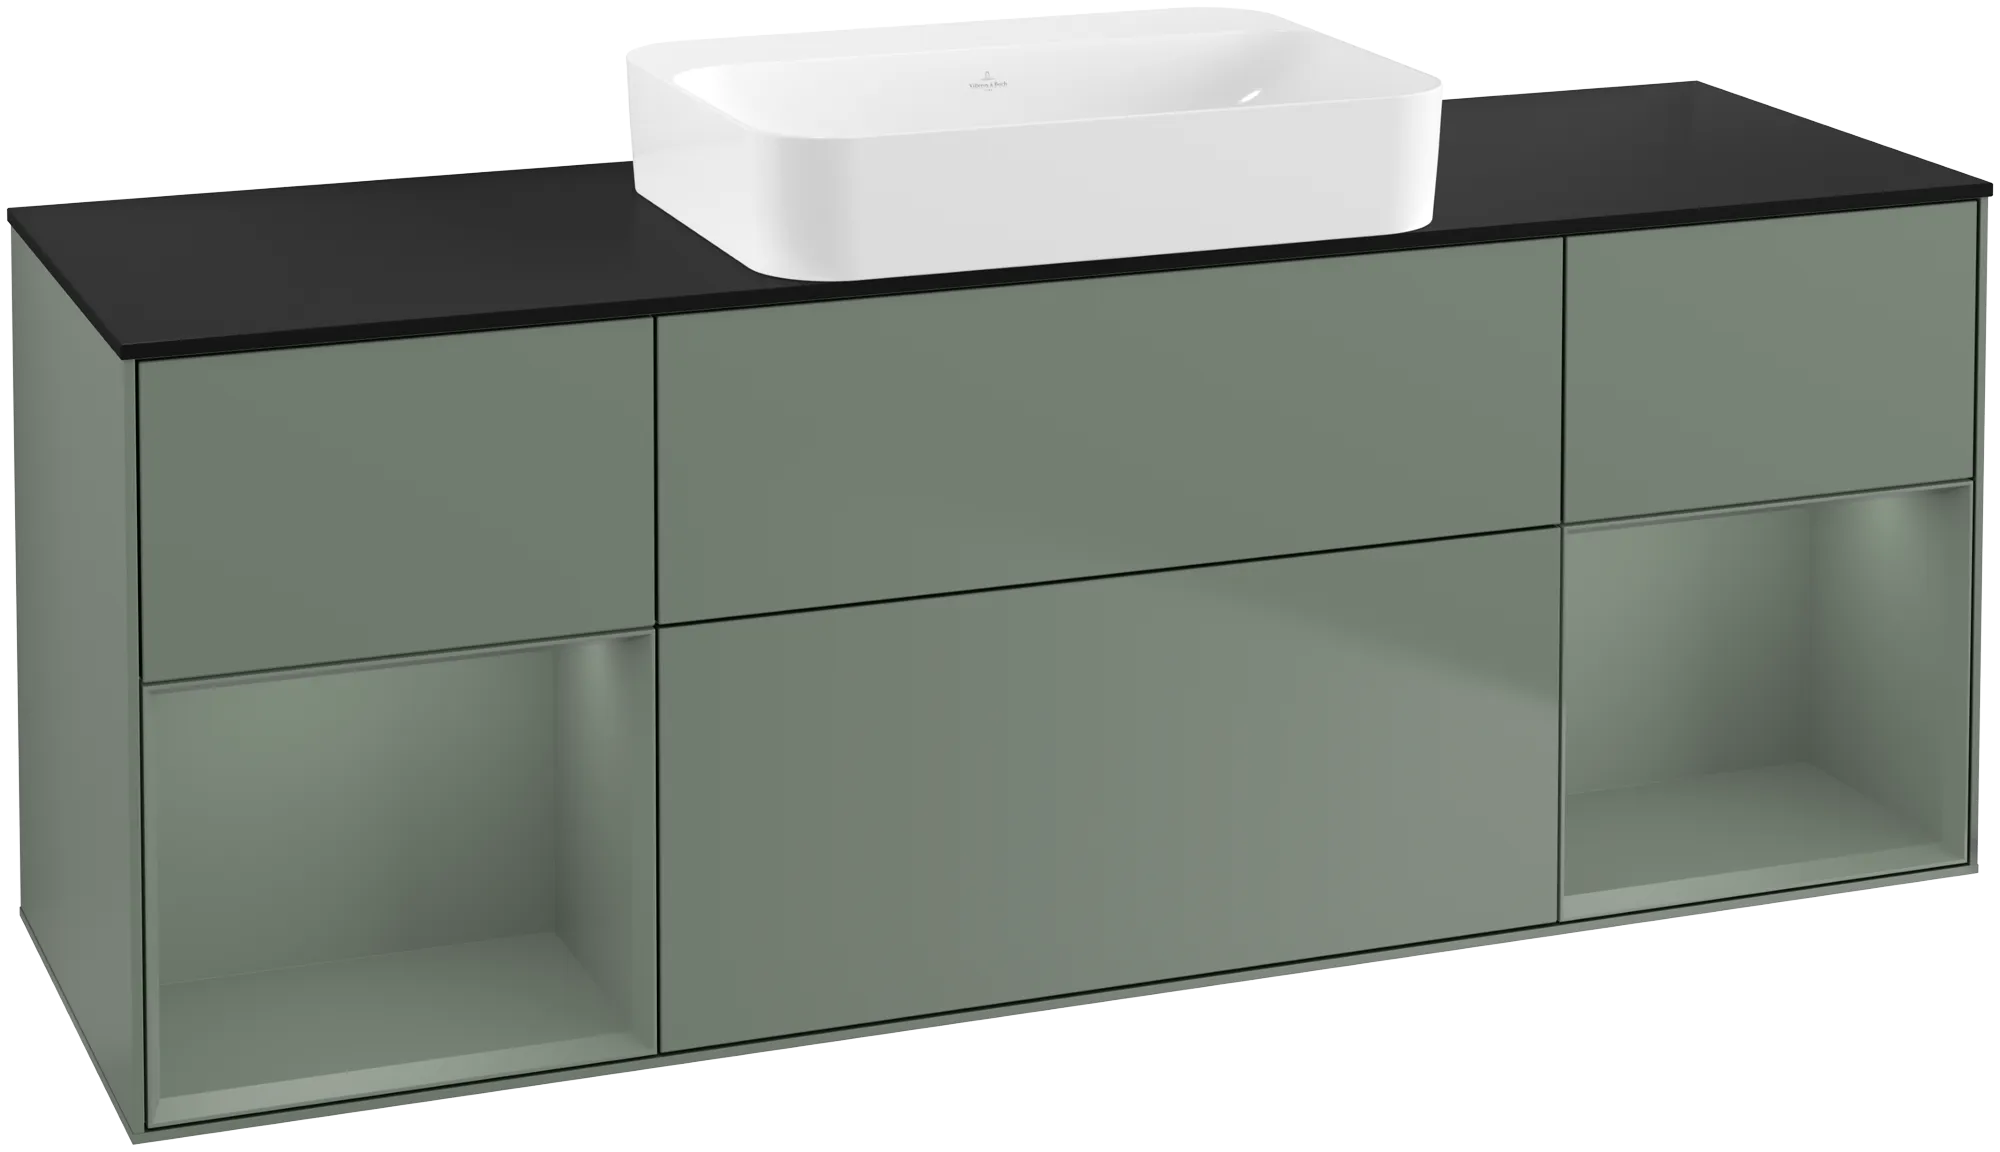 VILLEROY BOCH Finion Vanity unit, with lighting, 4 pull-out compartments, 1600 x 603 x 501 mm, Olive Matt Lacquer / Olive Matt Lacquer / Glass Black Matt #G742GMGM resmi